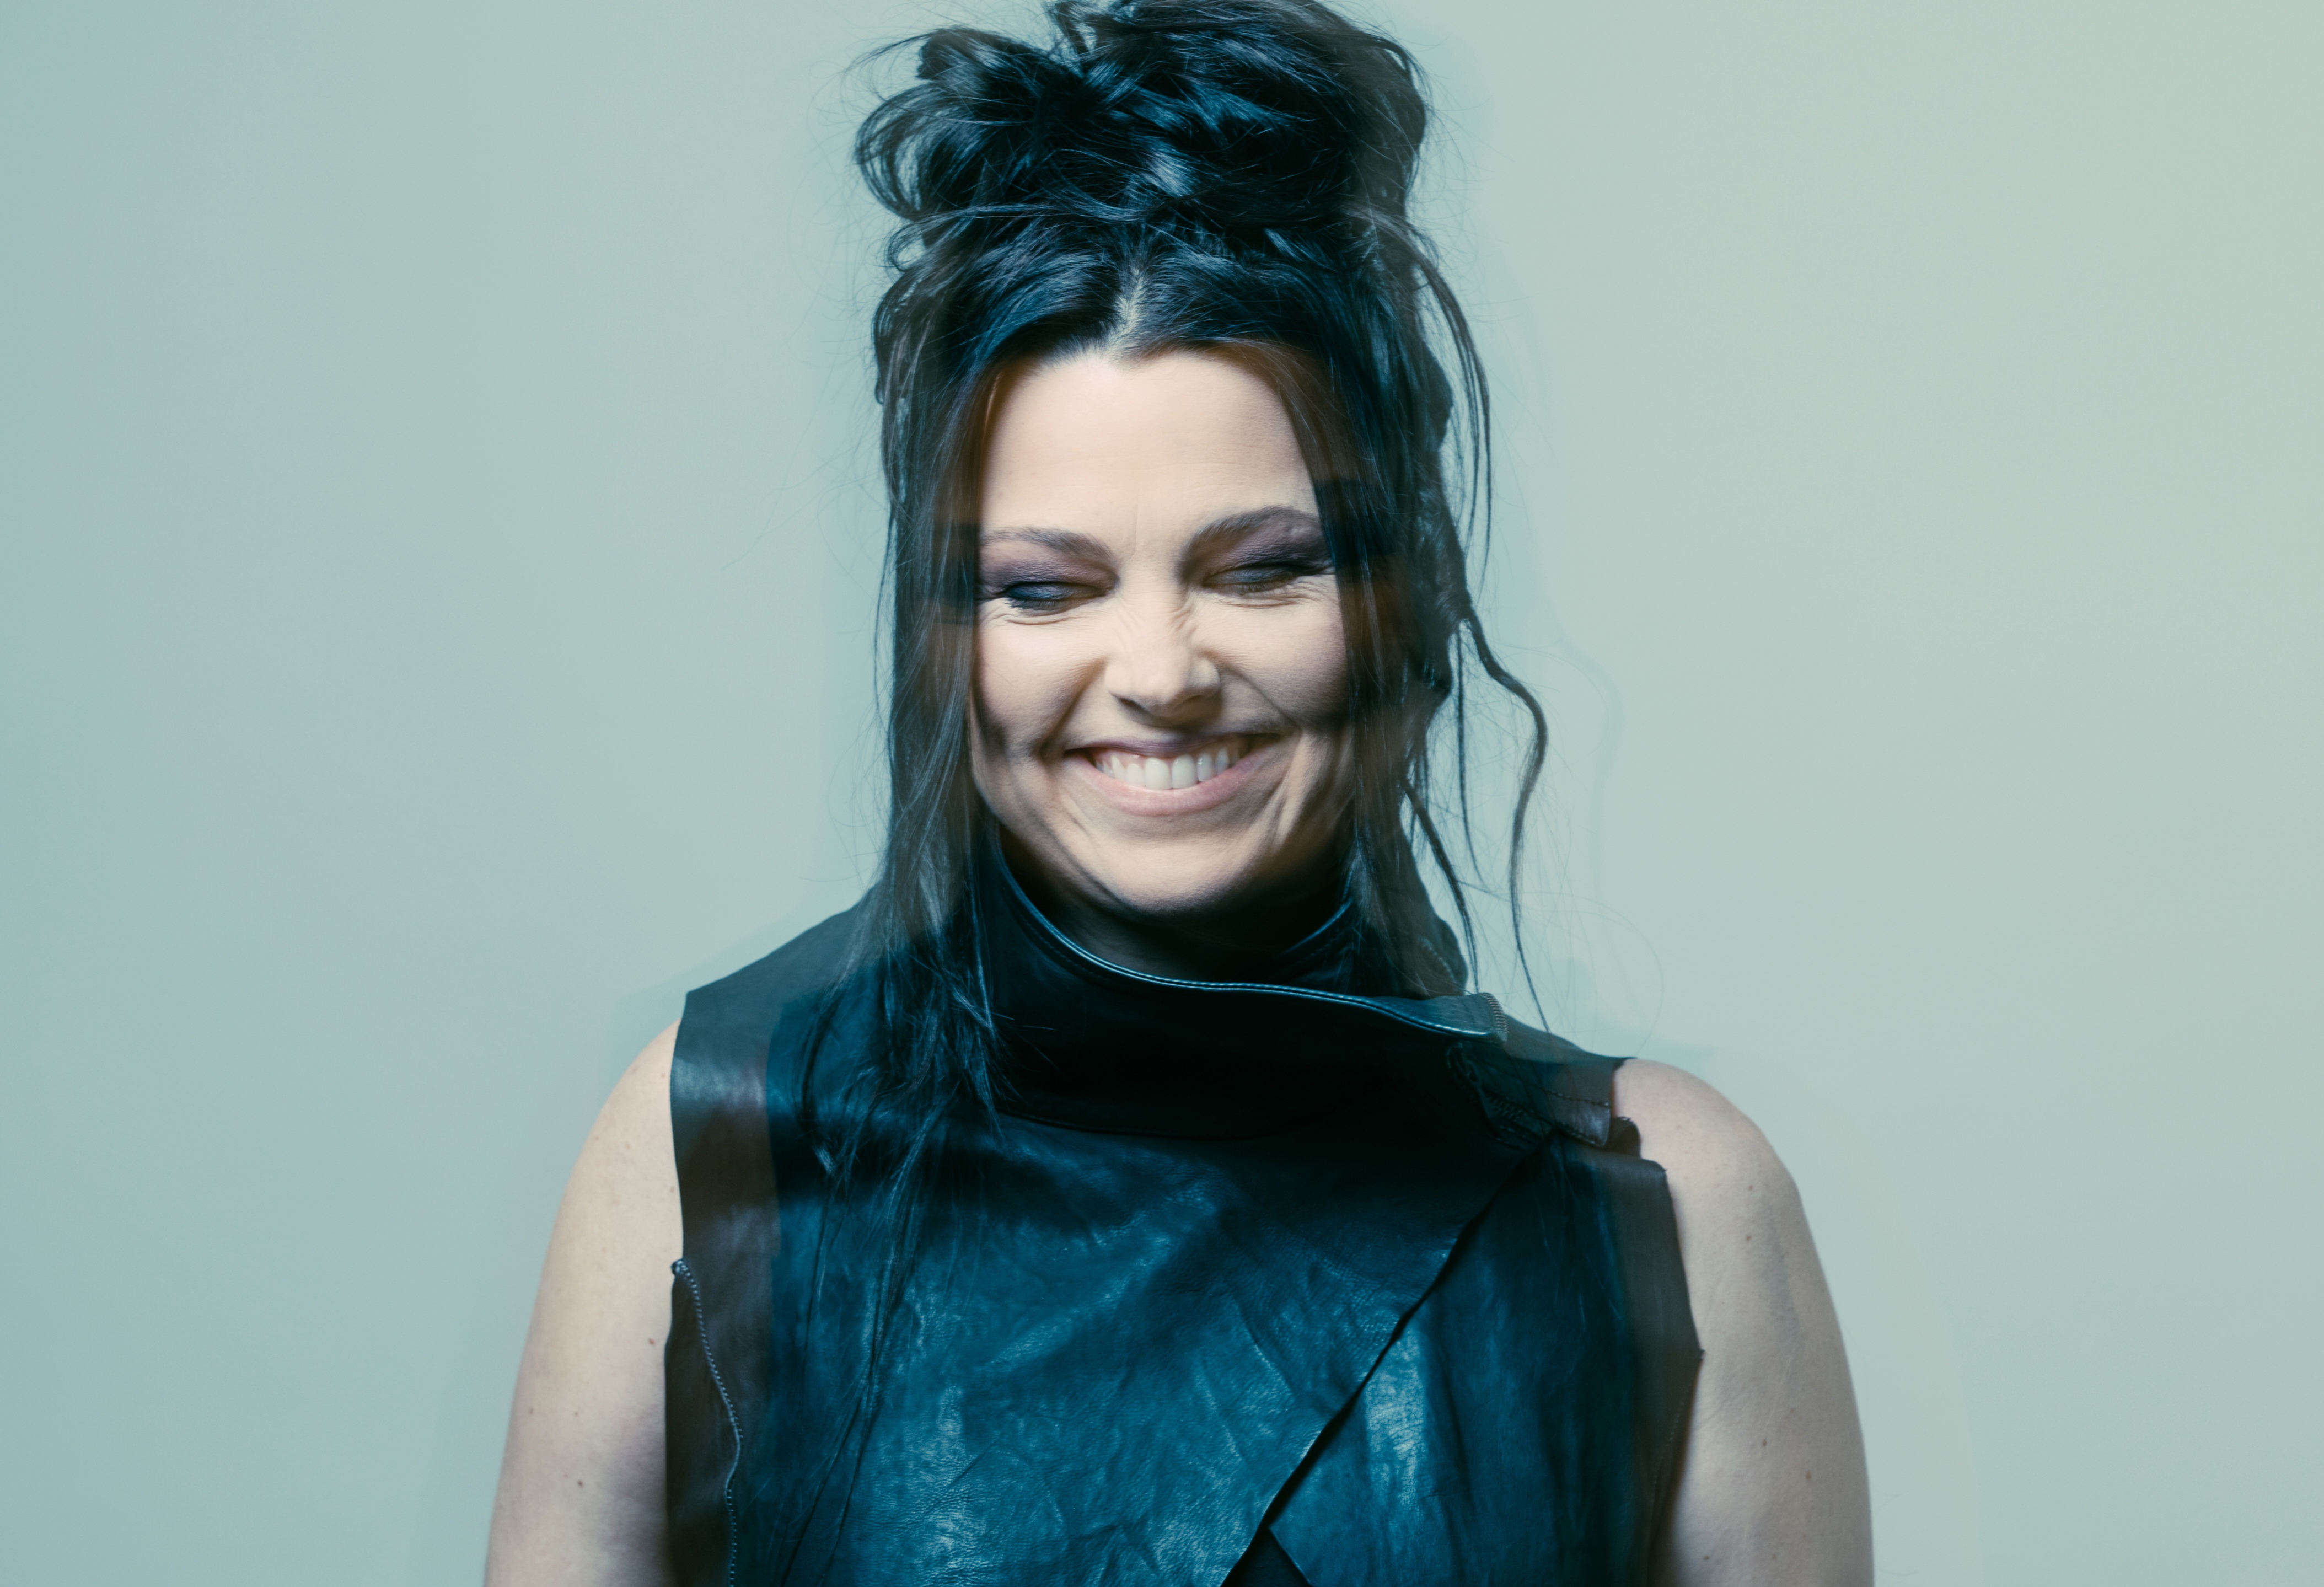 4215x2878
Keywords: amy lee;blue;photoshoot;the bitter truth;sesion;hq